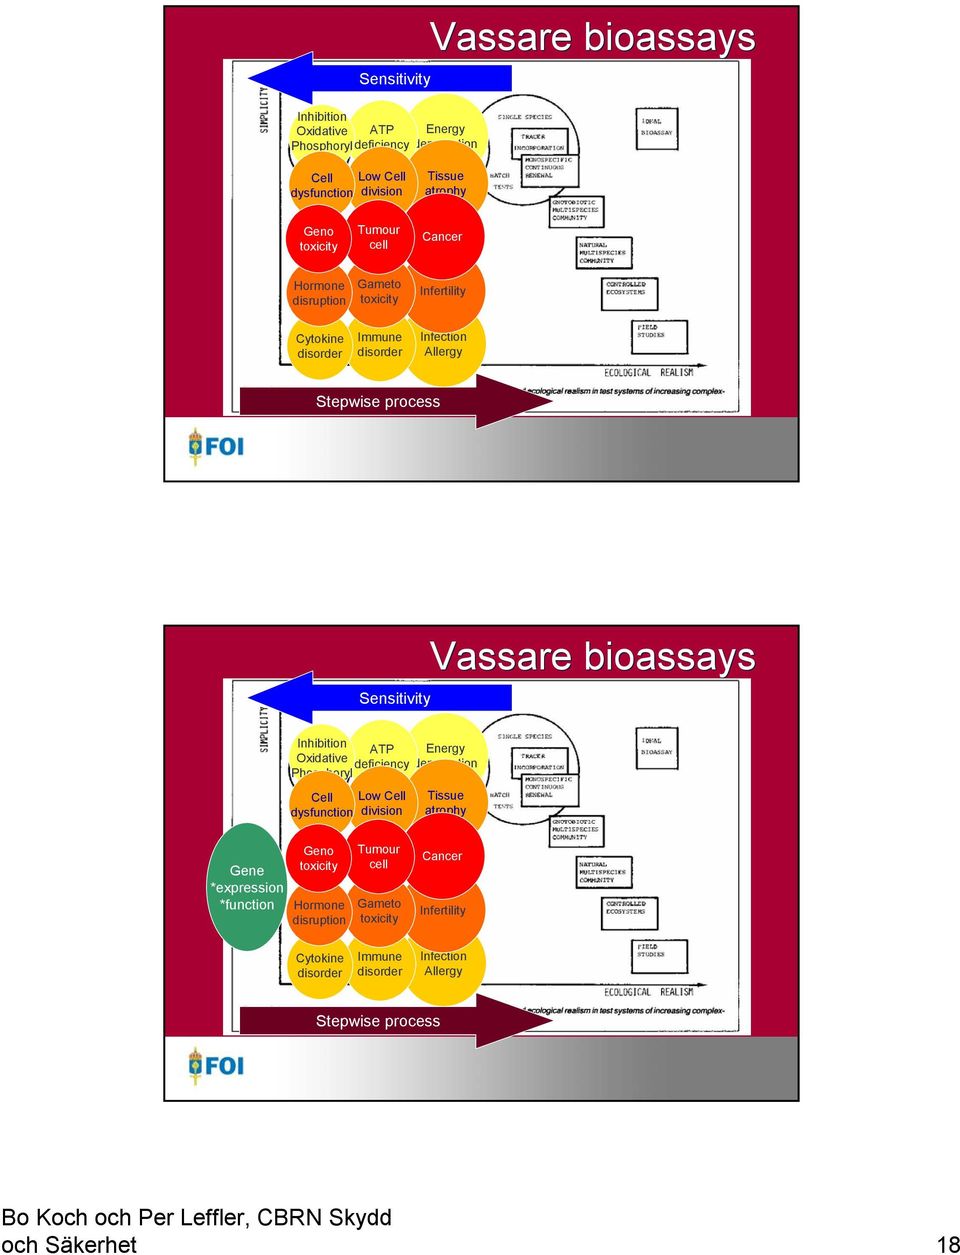 Vassare bioassays Inhibition ATP Energy Oxidative deficiency deprevation Phosphoryl Cell dysfunction Low Cell division Tissue atrophy Gene *expression